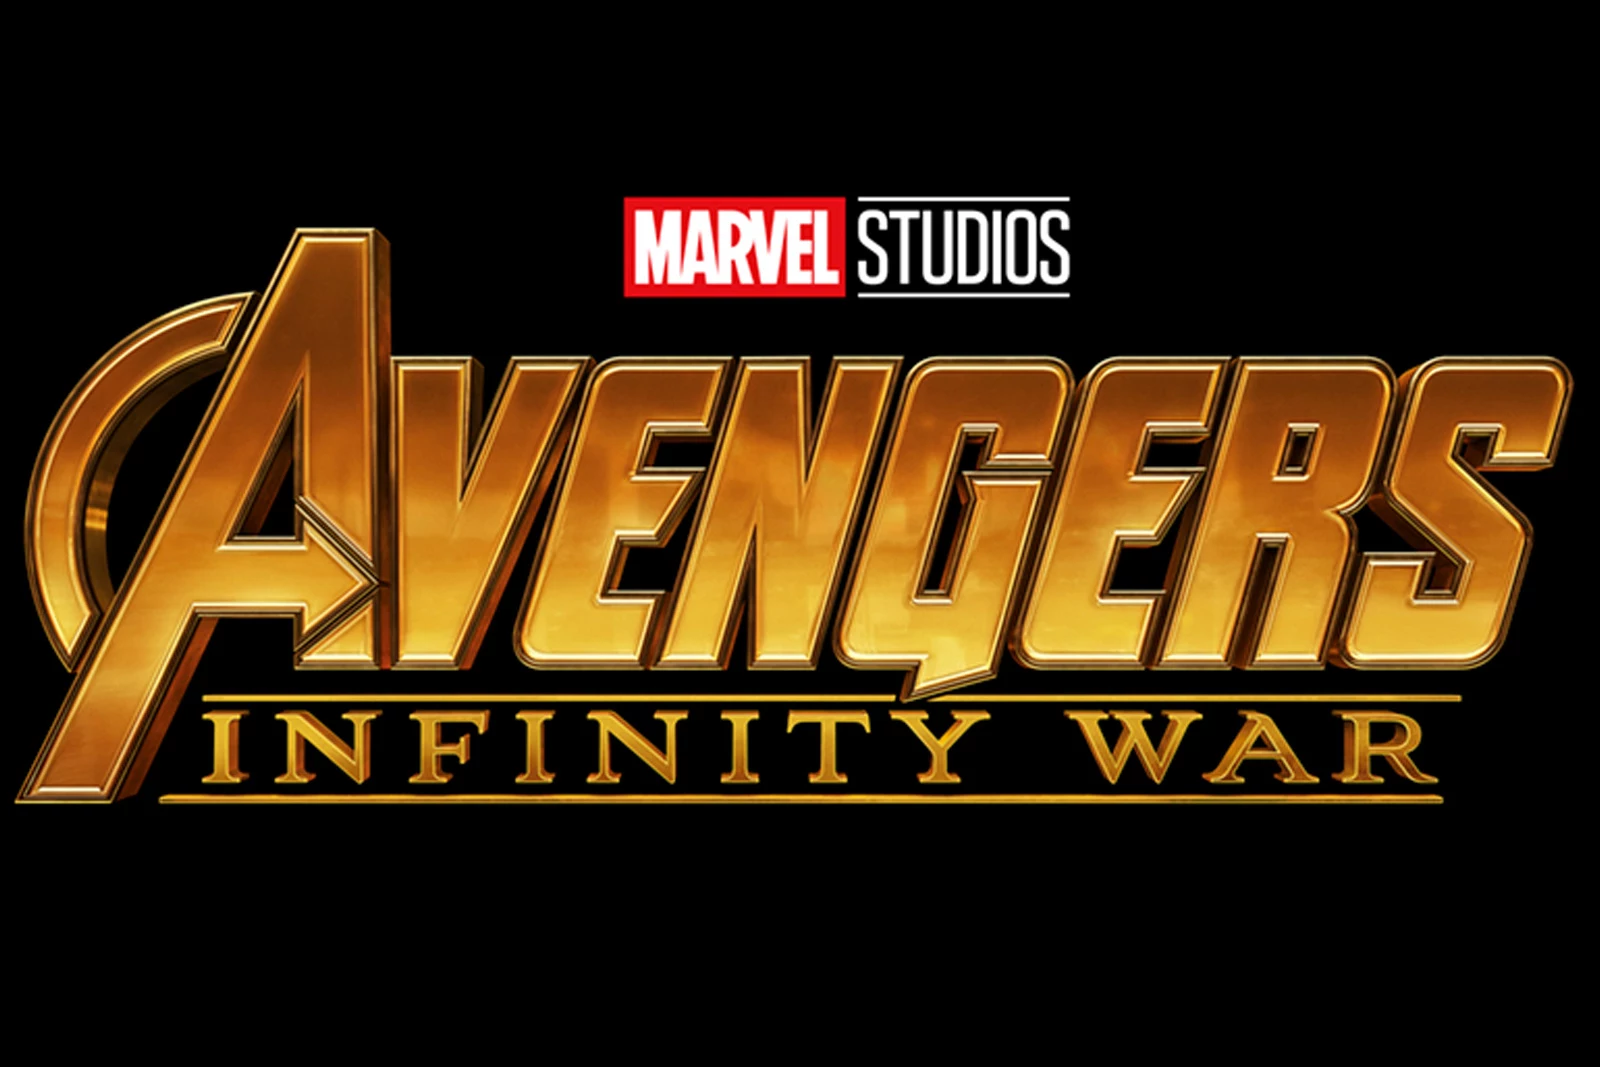 Where all the characters left off before 'Avengers: Infinity War